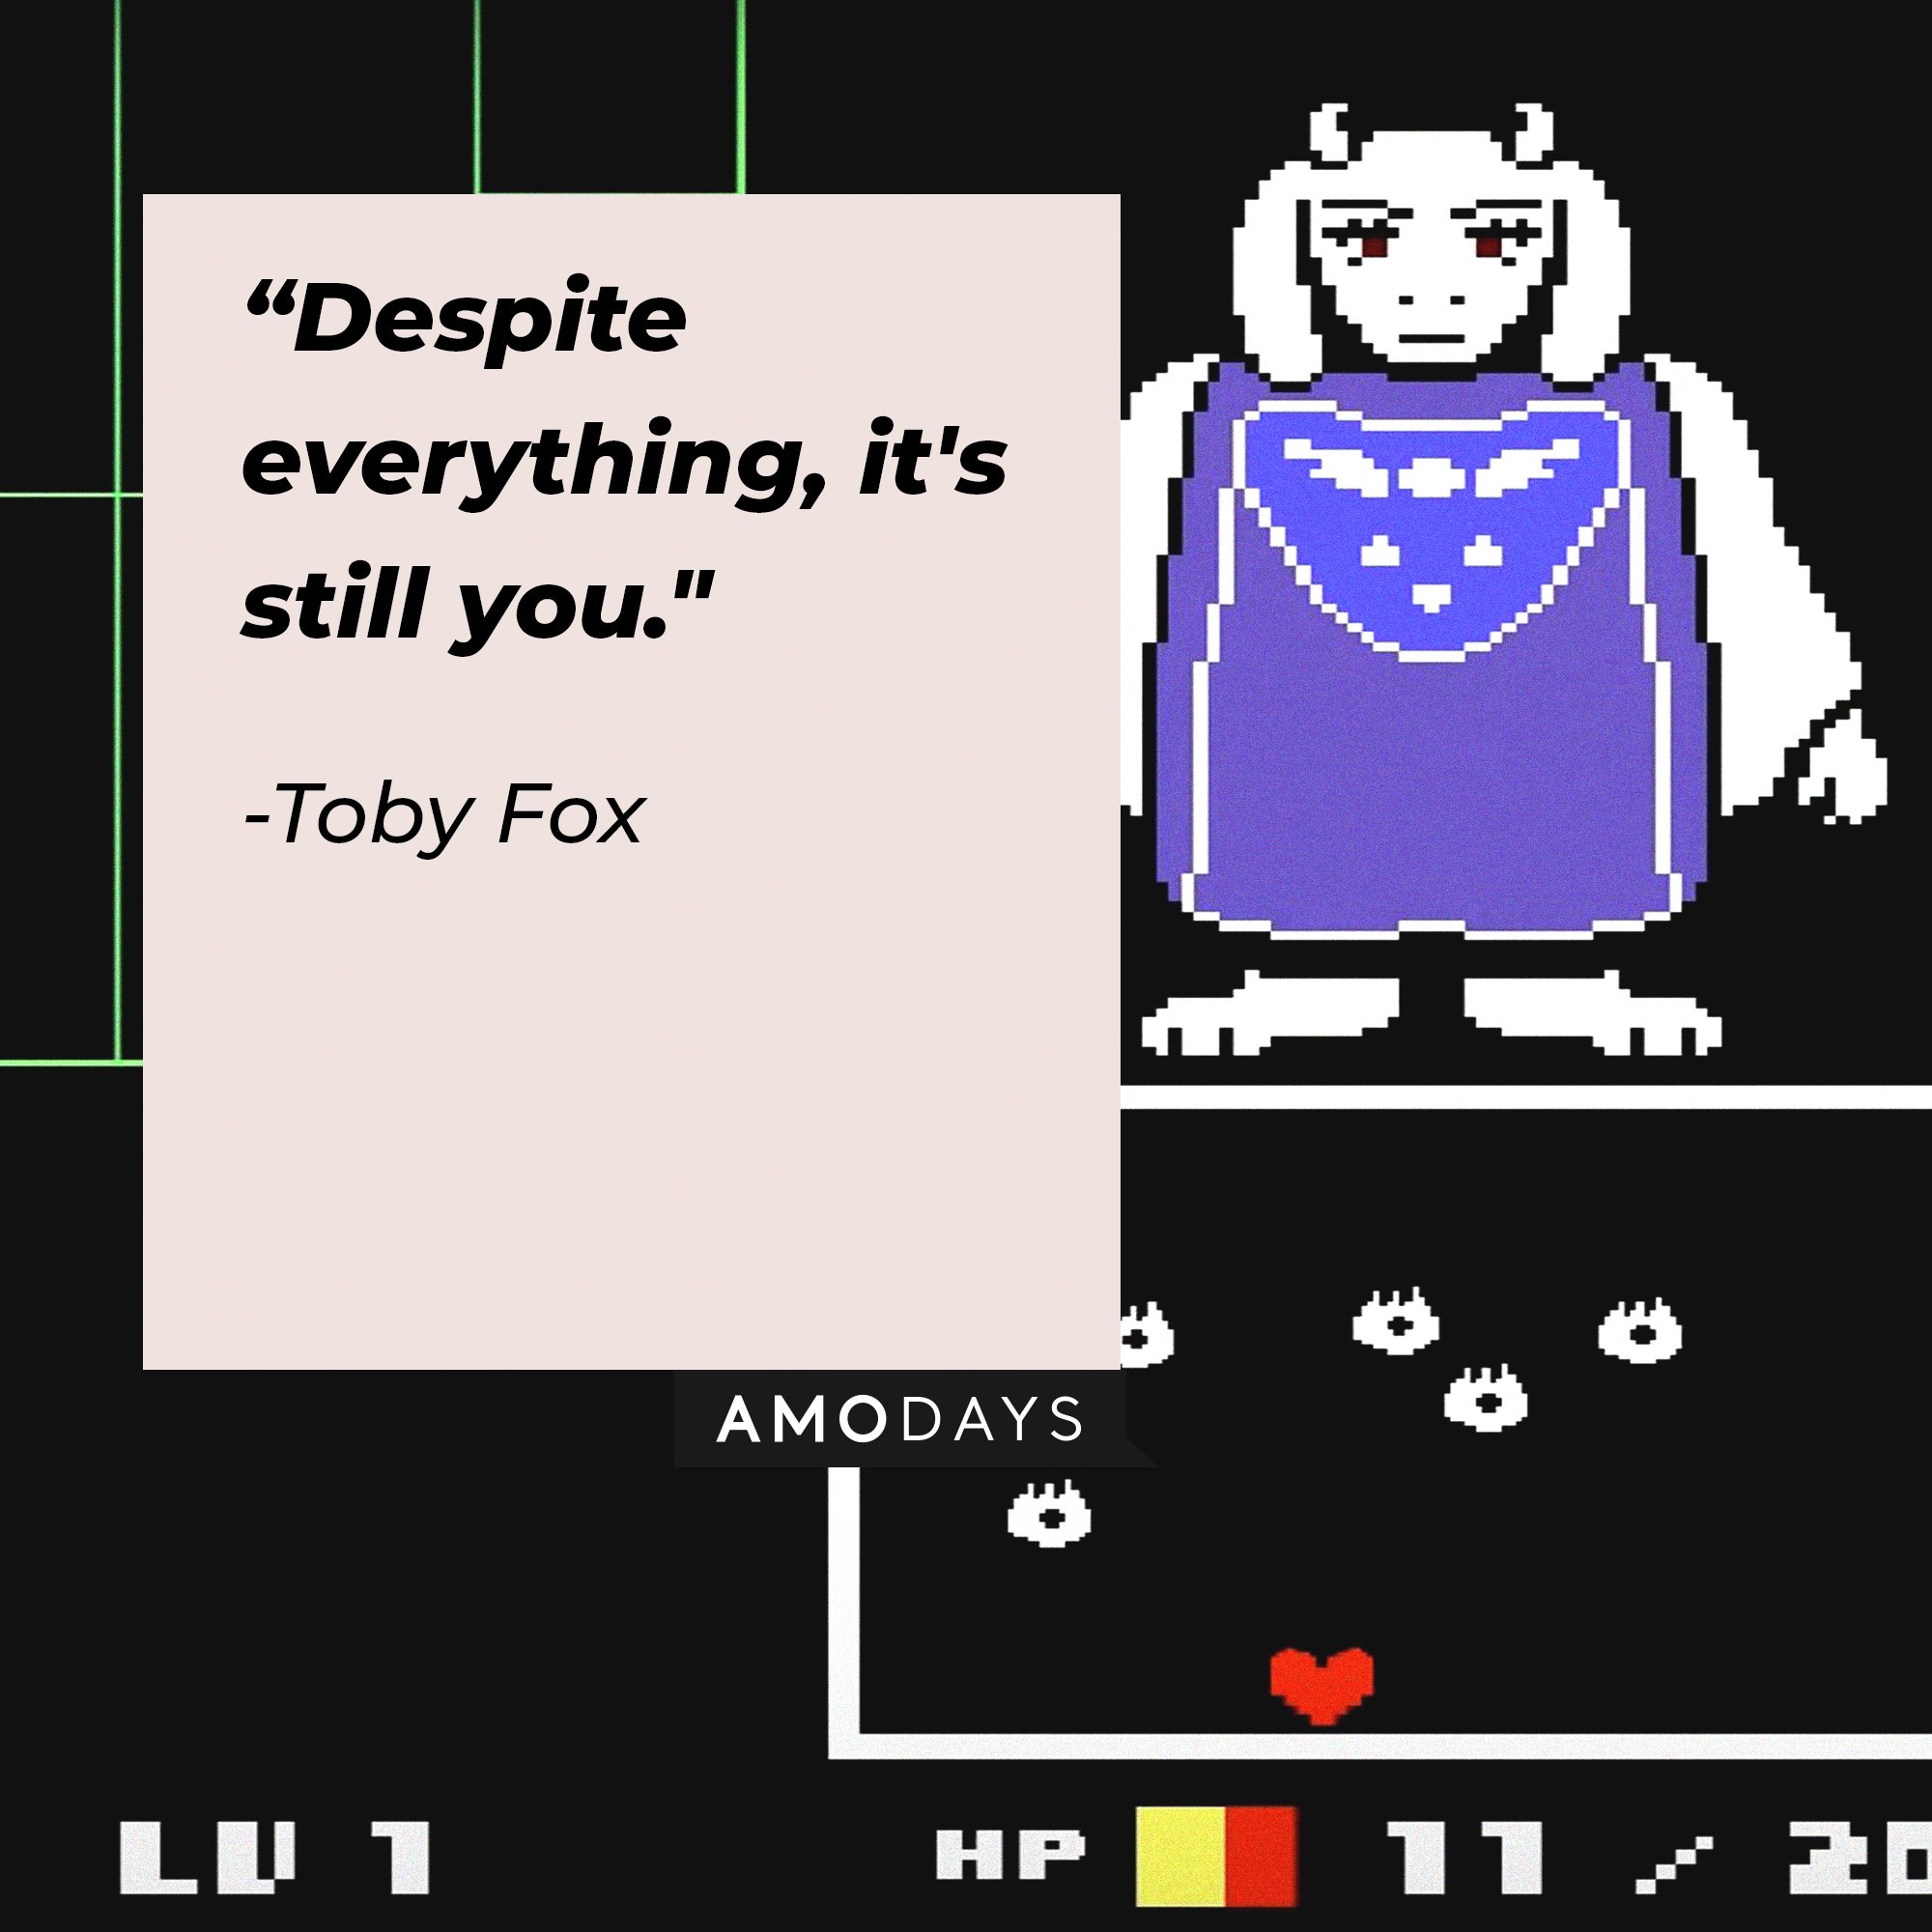 Toby Fox‘s quote: "Despite everything, it's still you." | Image: AmoDays